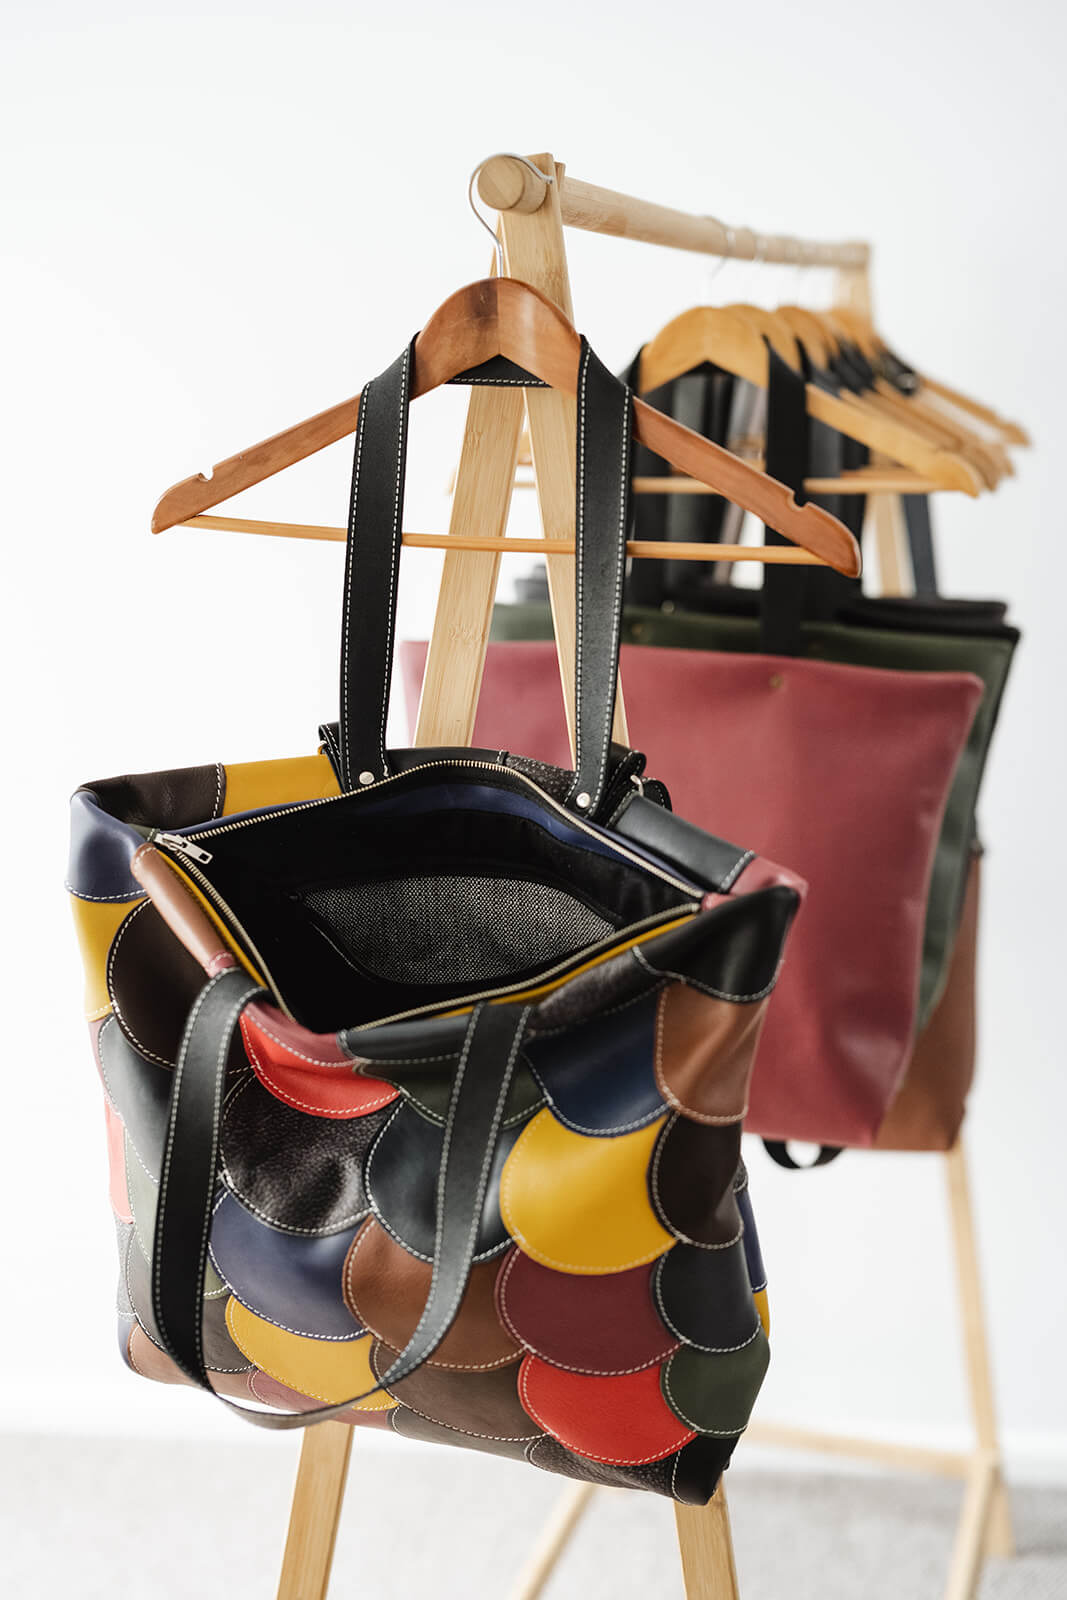 Timber rack in front of white wall with timber coat hangers holding bags. The front bag is a multicoloured leather tote bag made of many small circles in different colours stitched together. The bag is open so you can see the zip, black lining and black and white internal pocket